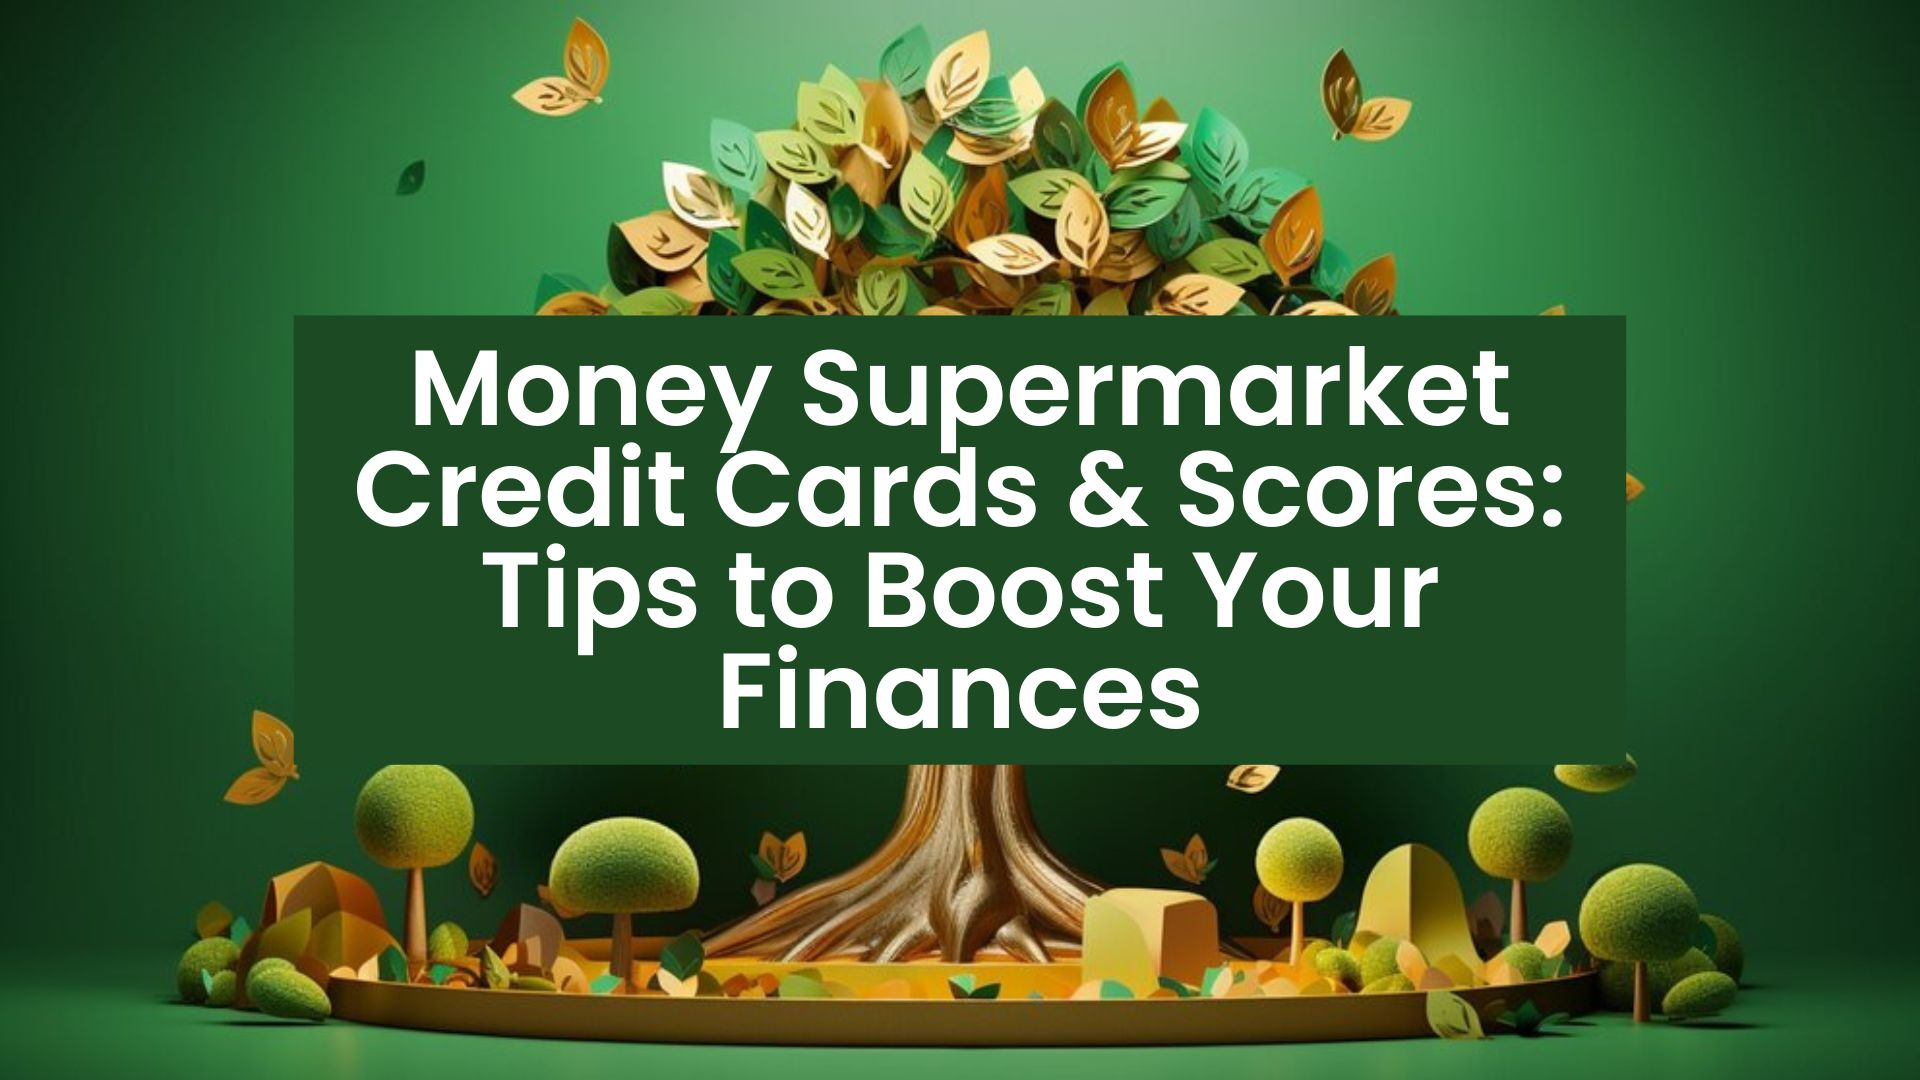 Understanding Credit Scores and Reports. Improving Your Credit Score. Money Supermarket Credit Cards. Money Supermarket Credit Score